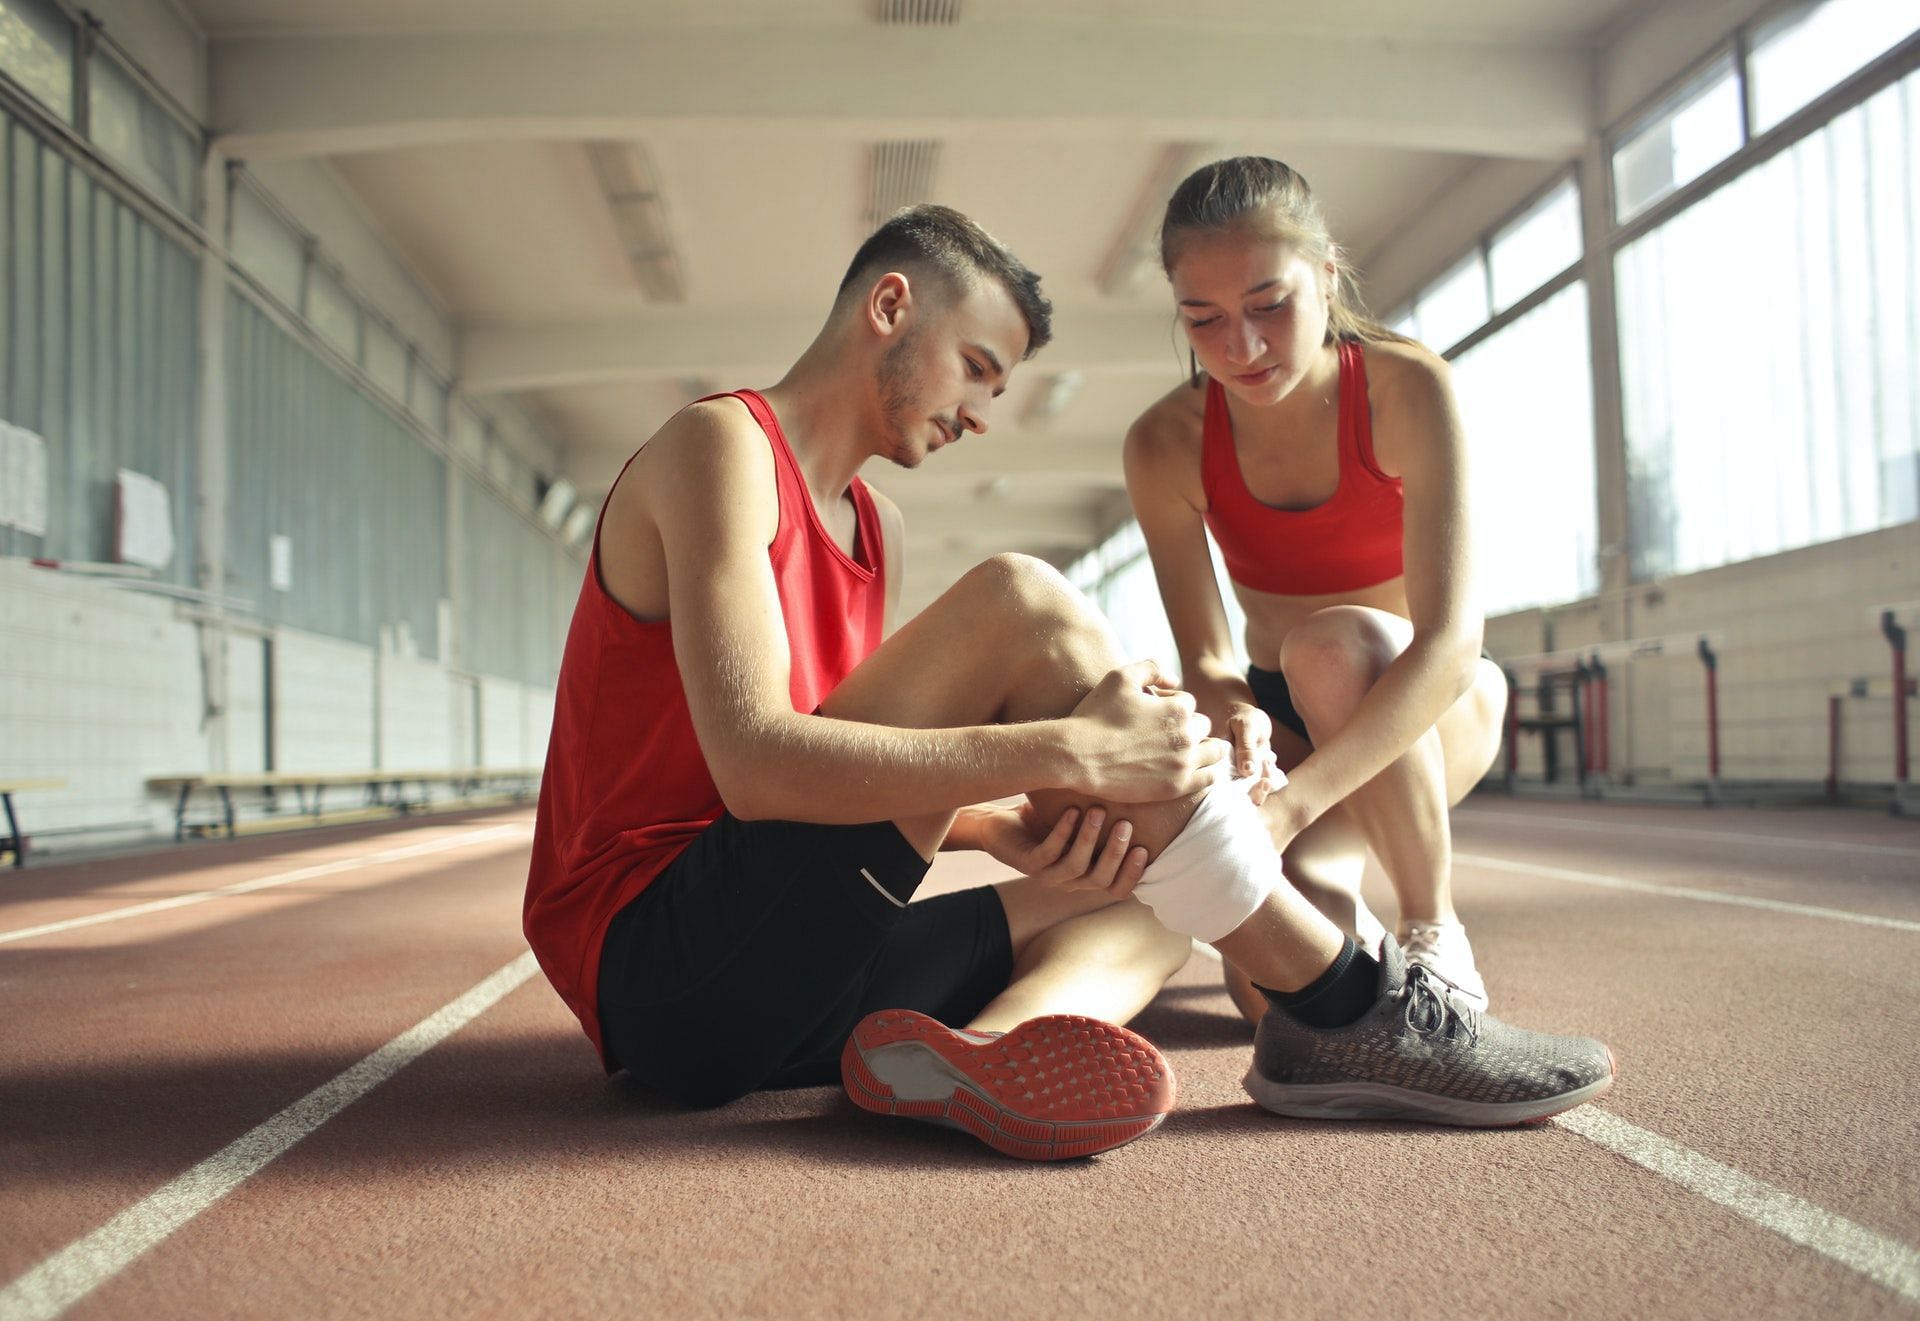 6 Effective Ways to Prevent Injury During Exercise